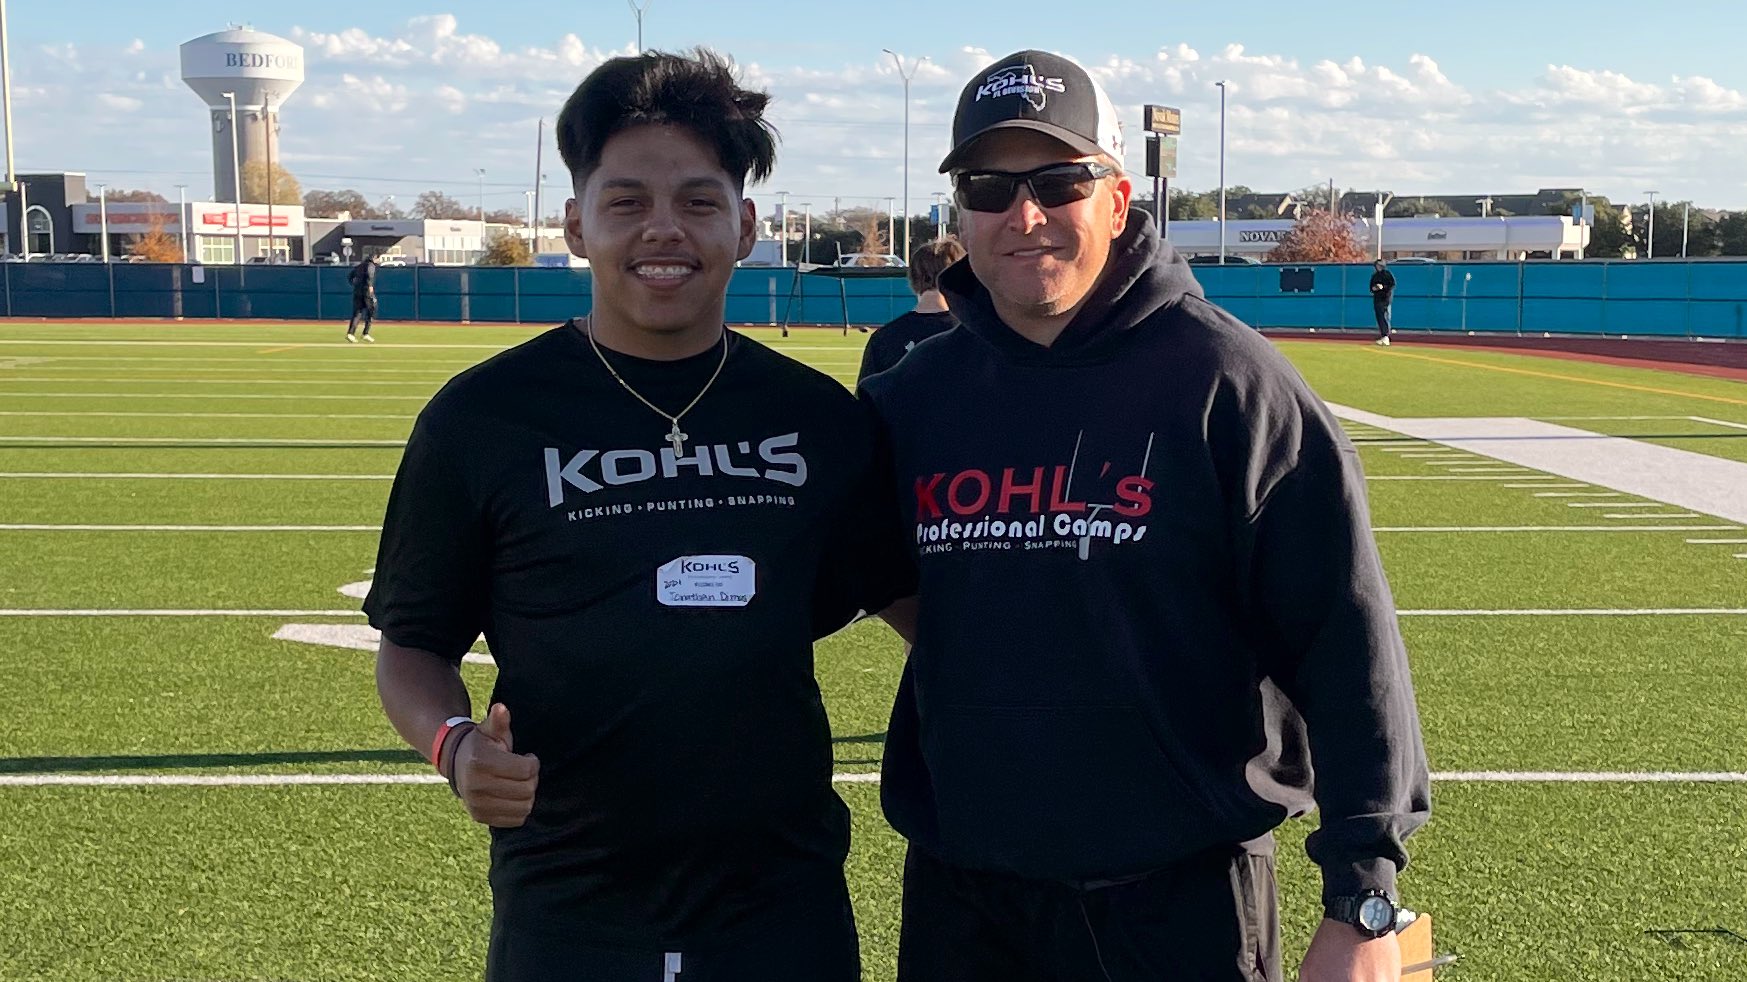 Kohl's Professional Camps  Why Choose Kohl's Kicking Camps?